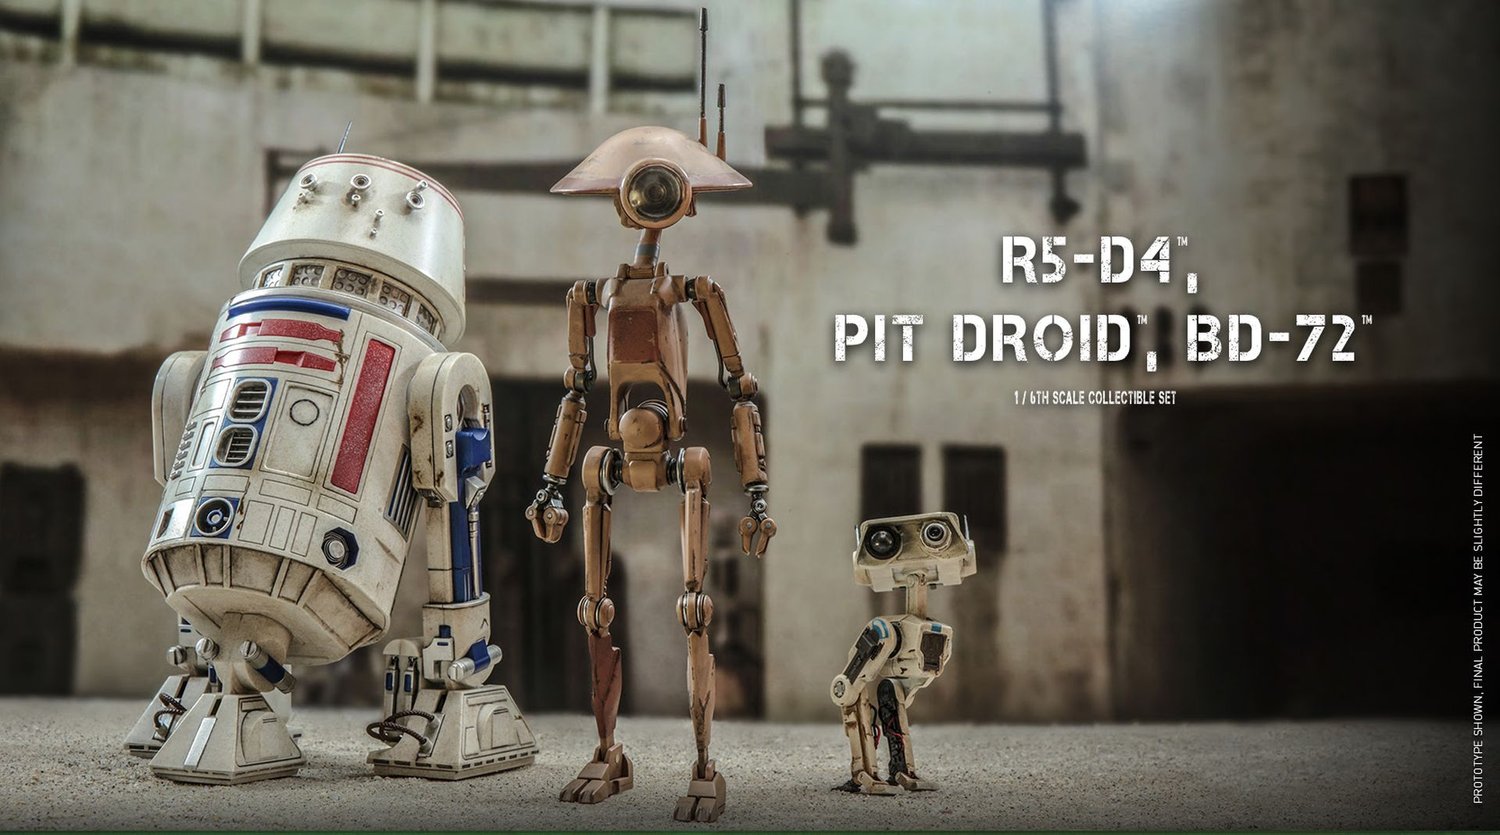 Keep Your Collectible Spaceships In Tip Top Shape With New STAR WARS Droid Set From Hot Toys